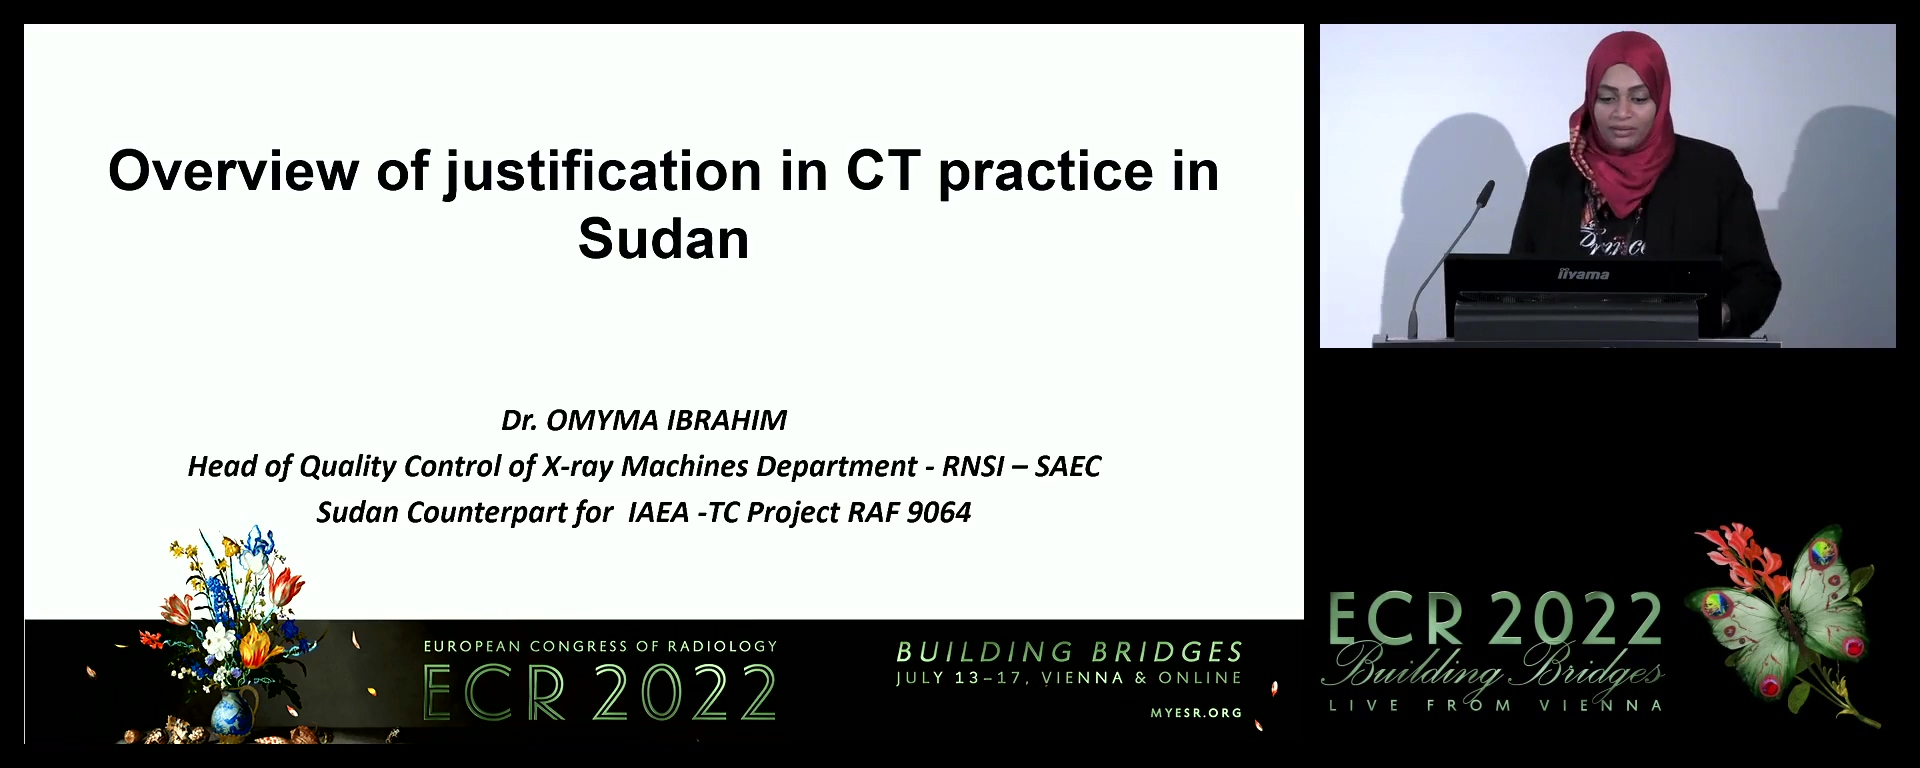 Overview of justification in CT practice in Sudan - Omyma Ibrahim, Khartoum / SD